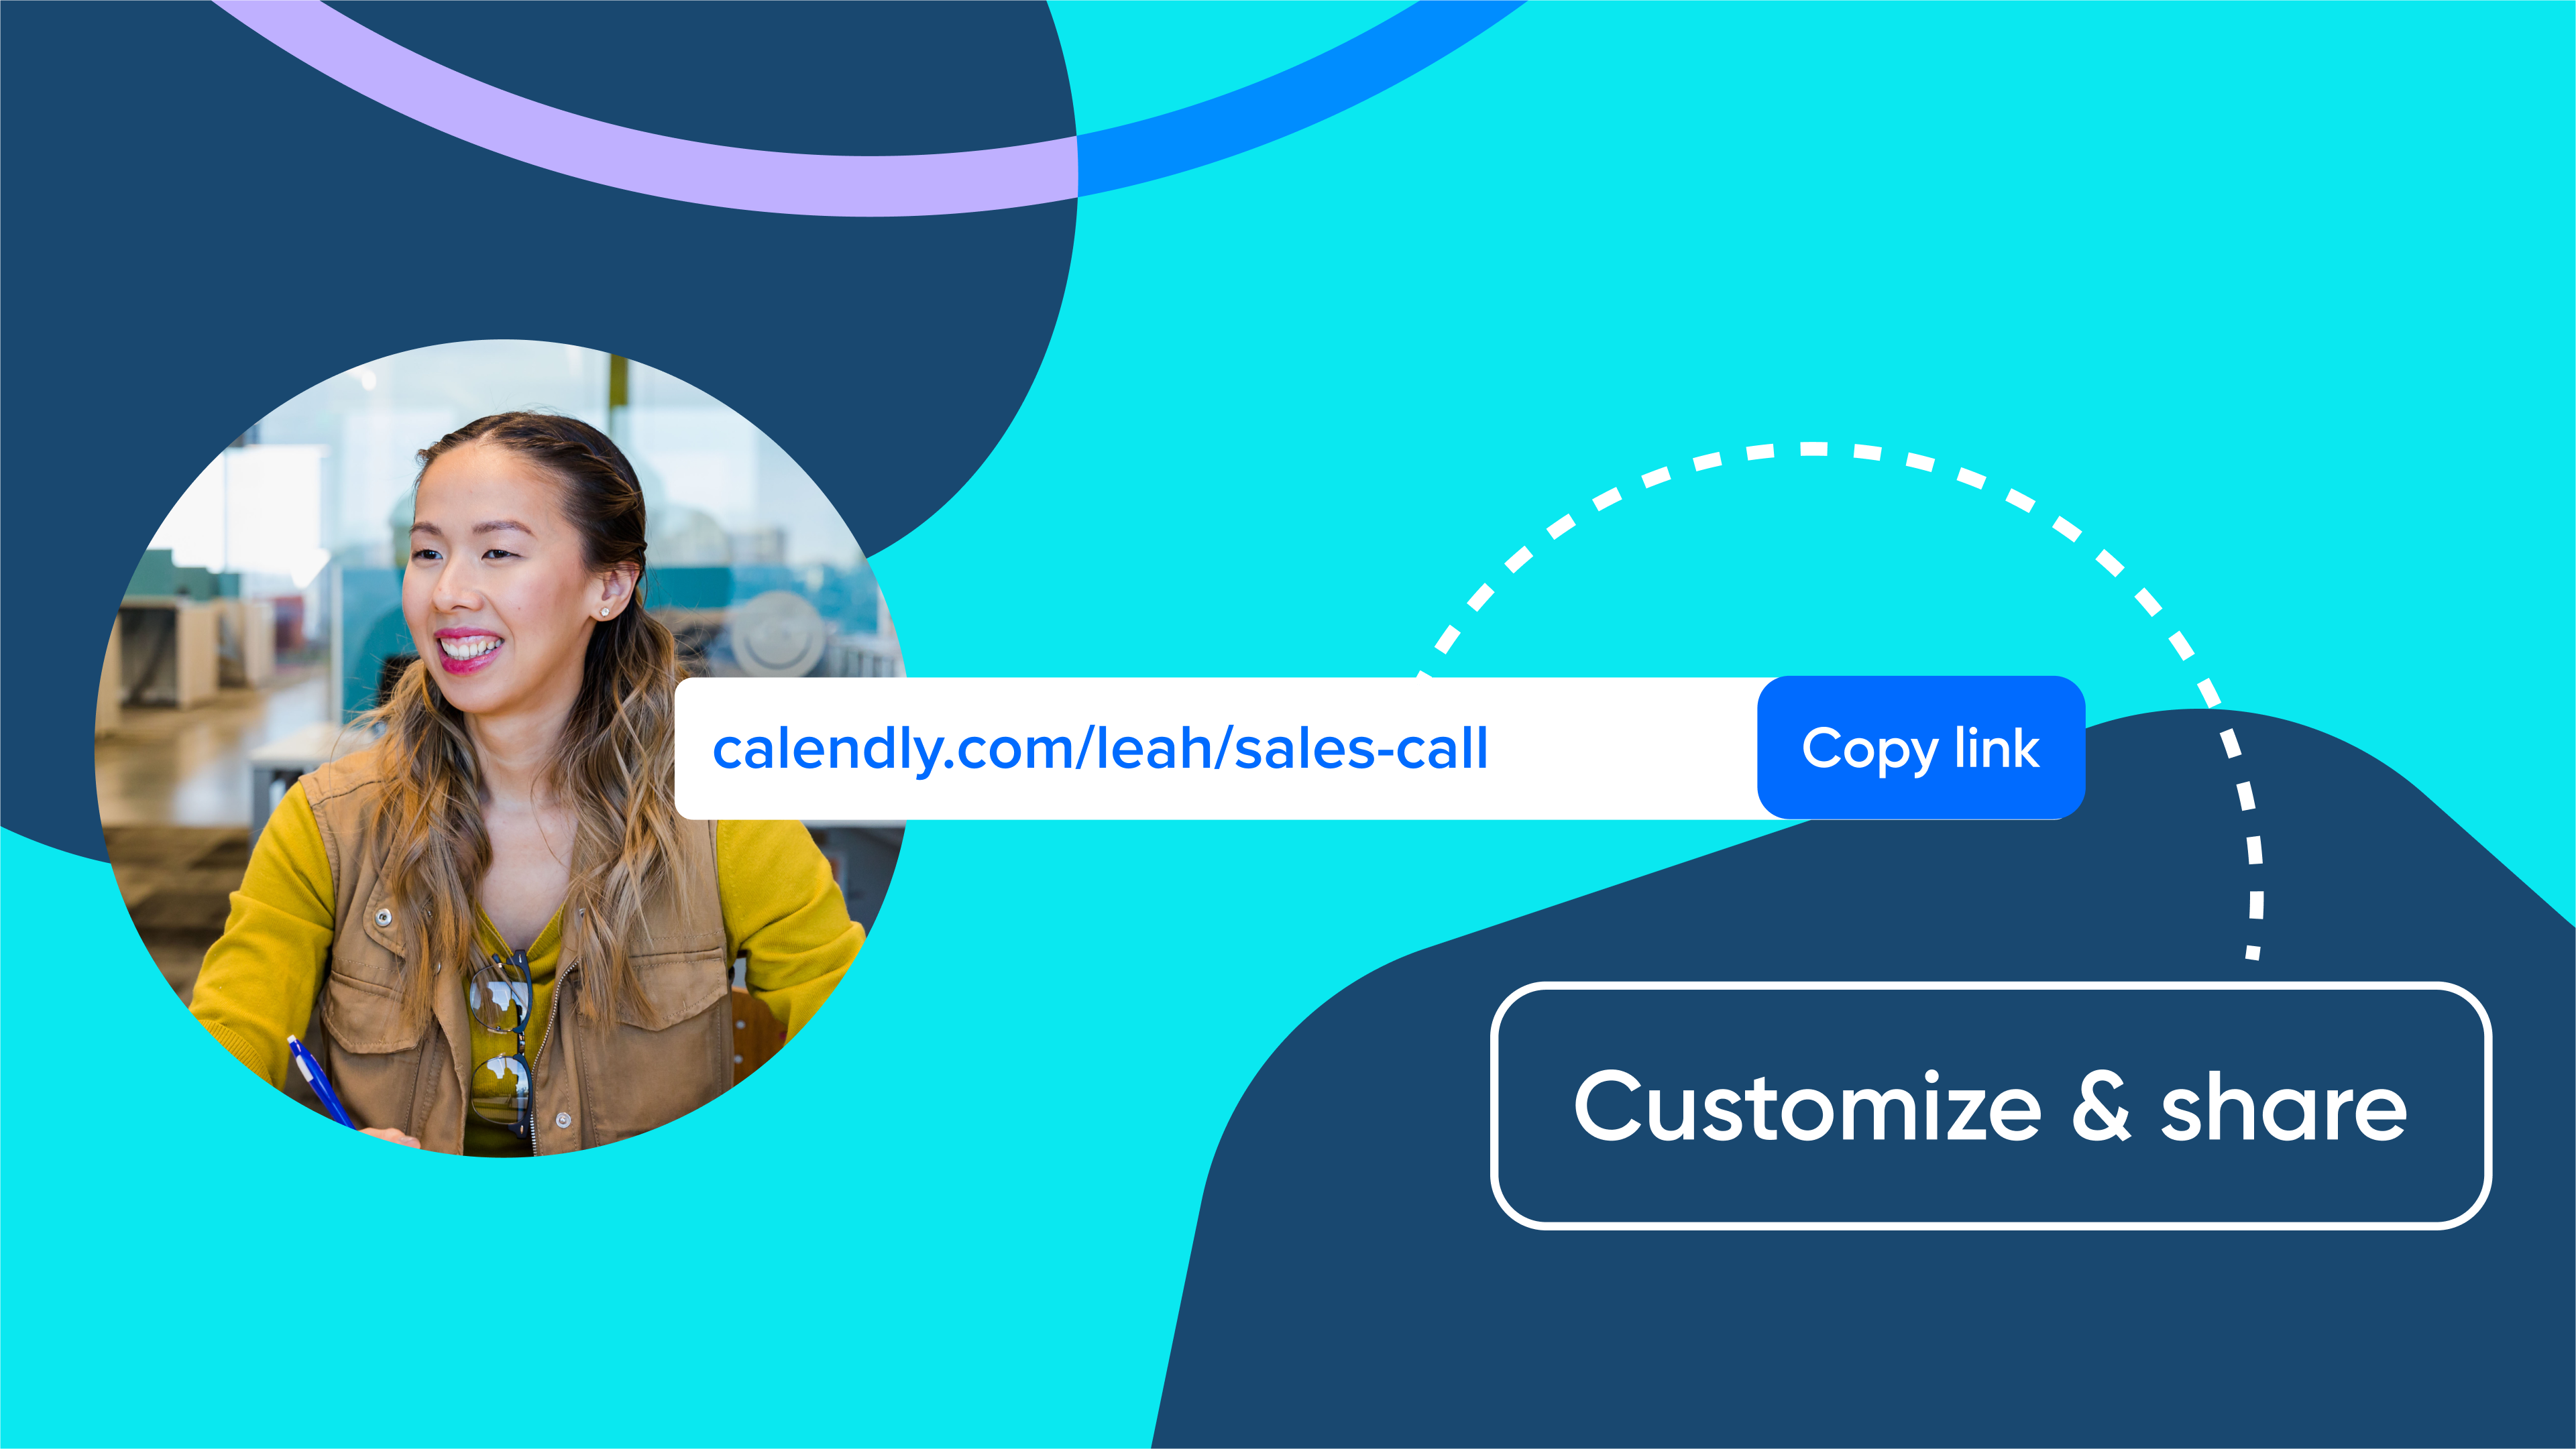 Calendly announces customize once and share feature